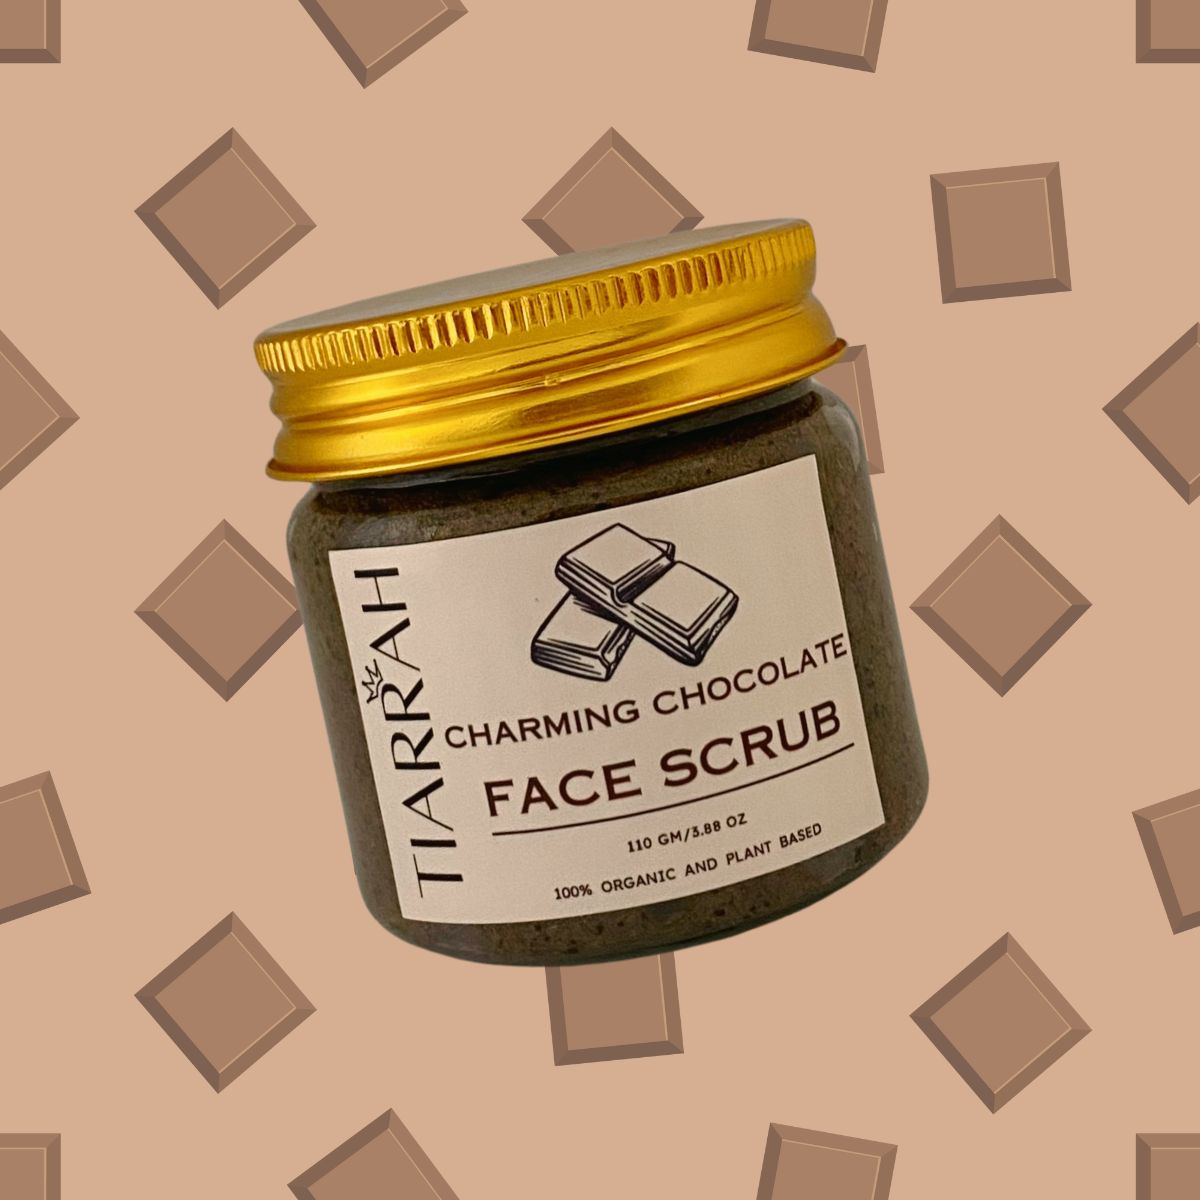 Luxury Chocolate Face Scrub by Tiarrah: Organic, Non-Toxic - The Luxury Bath and Body Care Shop